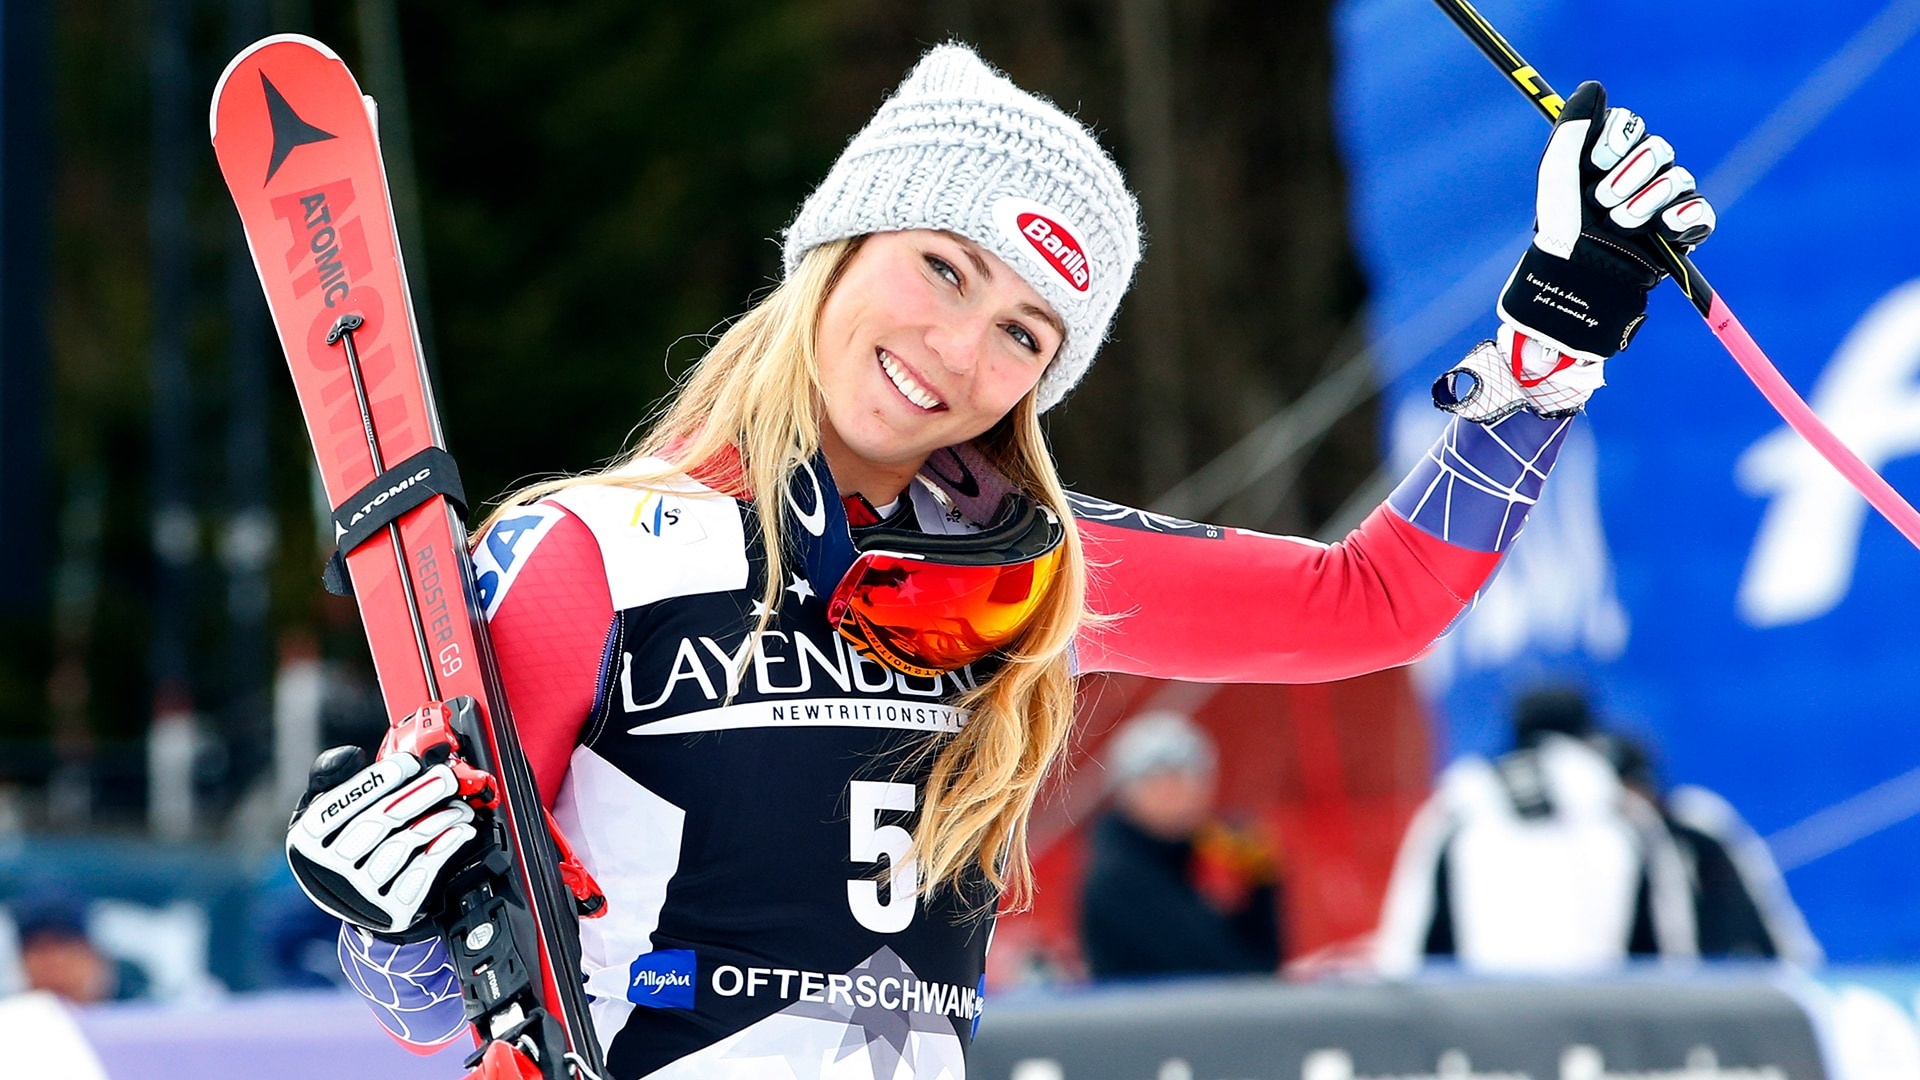 Mikaela Shiffrin, Winter Olympics viewer's guide, Racing schedule, Skiing spectacle, 1920x1080 Full HD Desktop